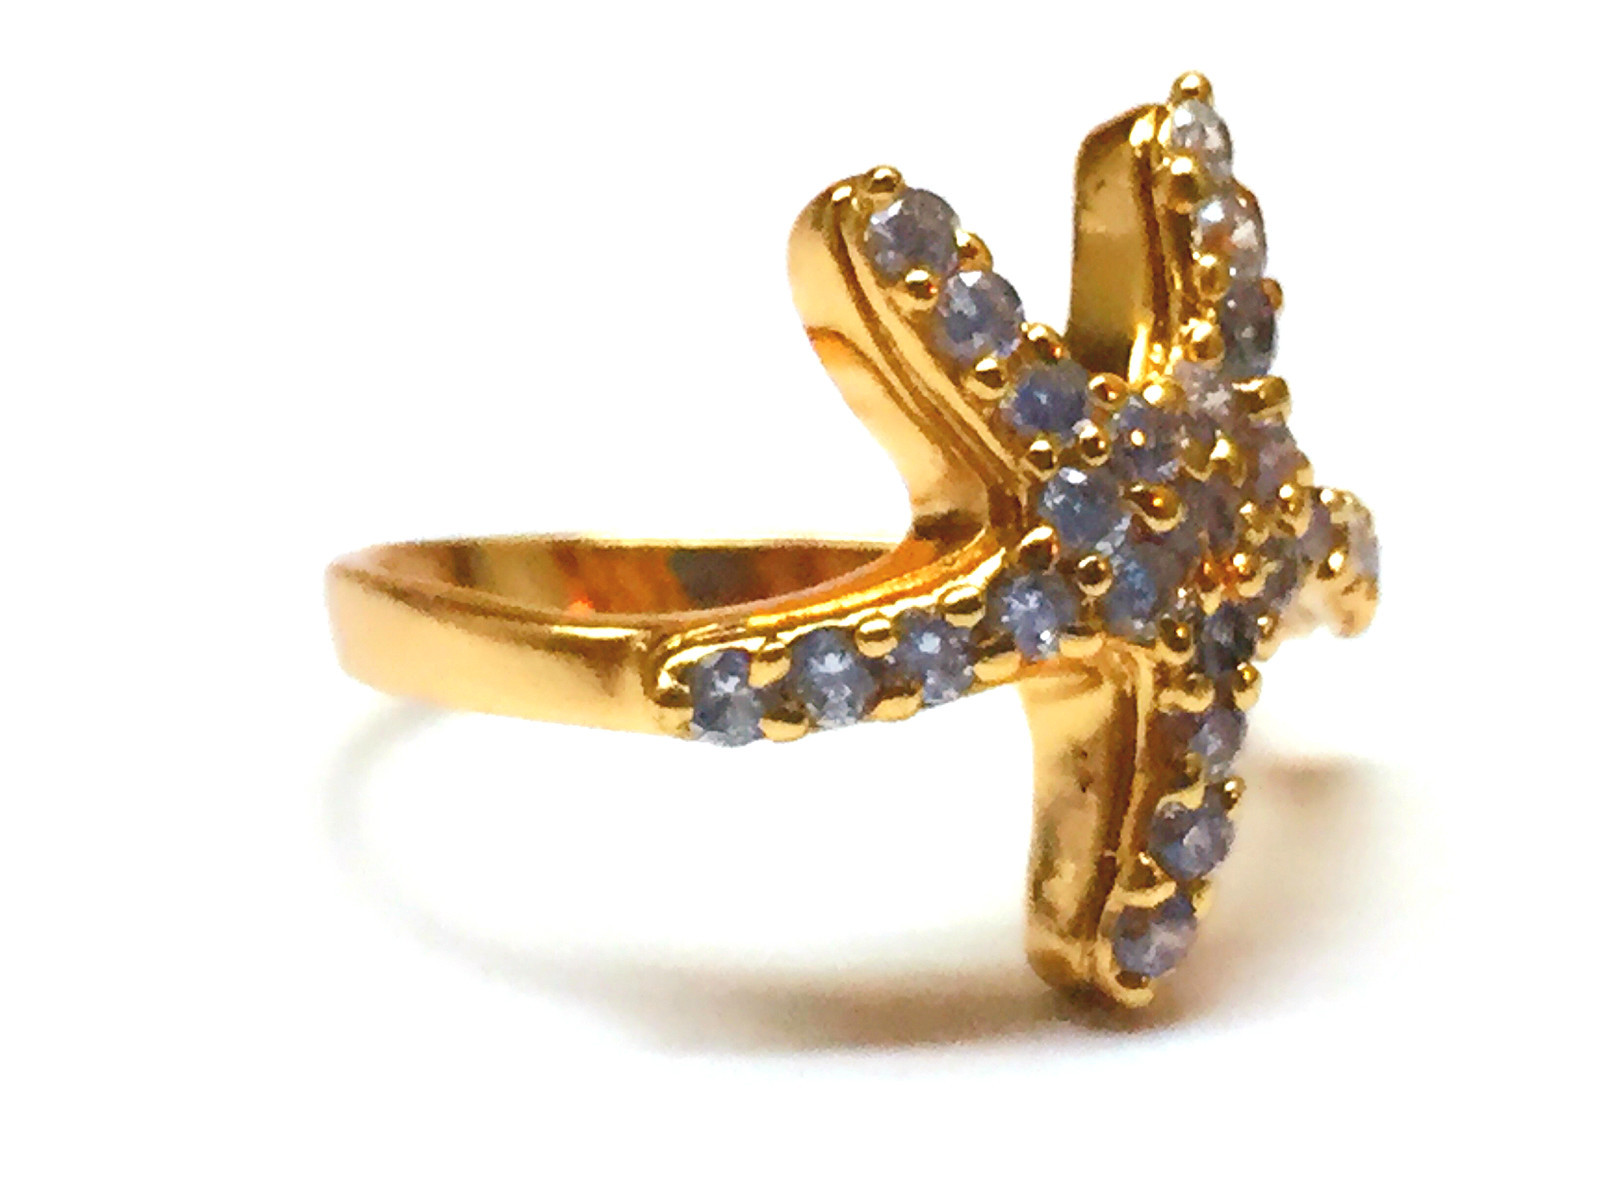 Star fish simulated diamond 24k gold filled wedding ring proposal marry ring - $40.00